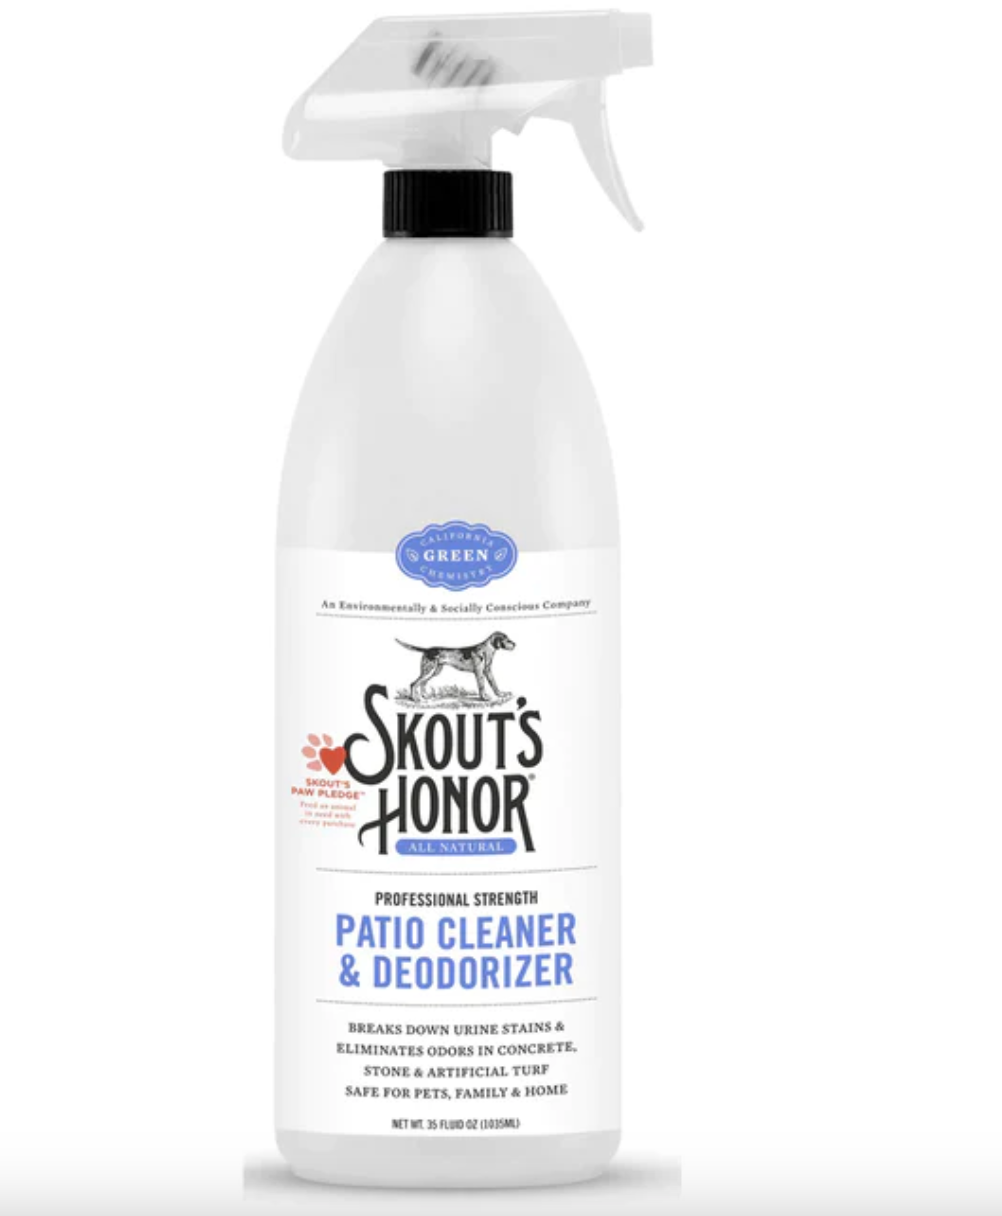 Skouts Honor Patio Cleaner and Deodorizer